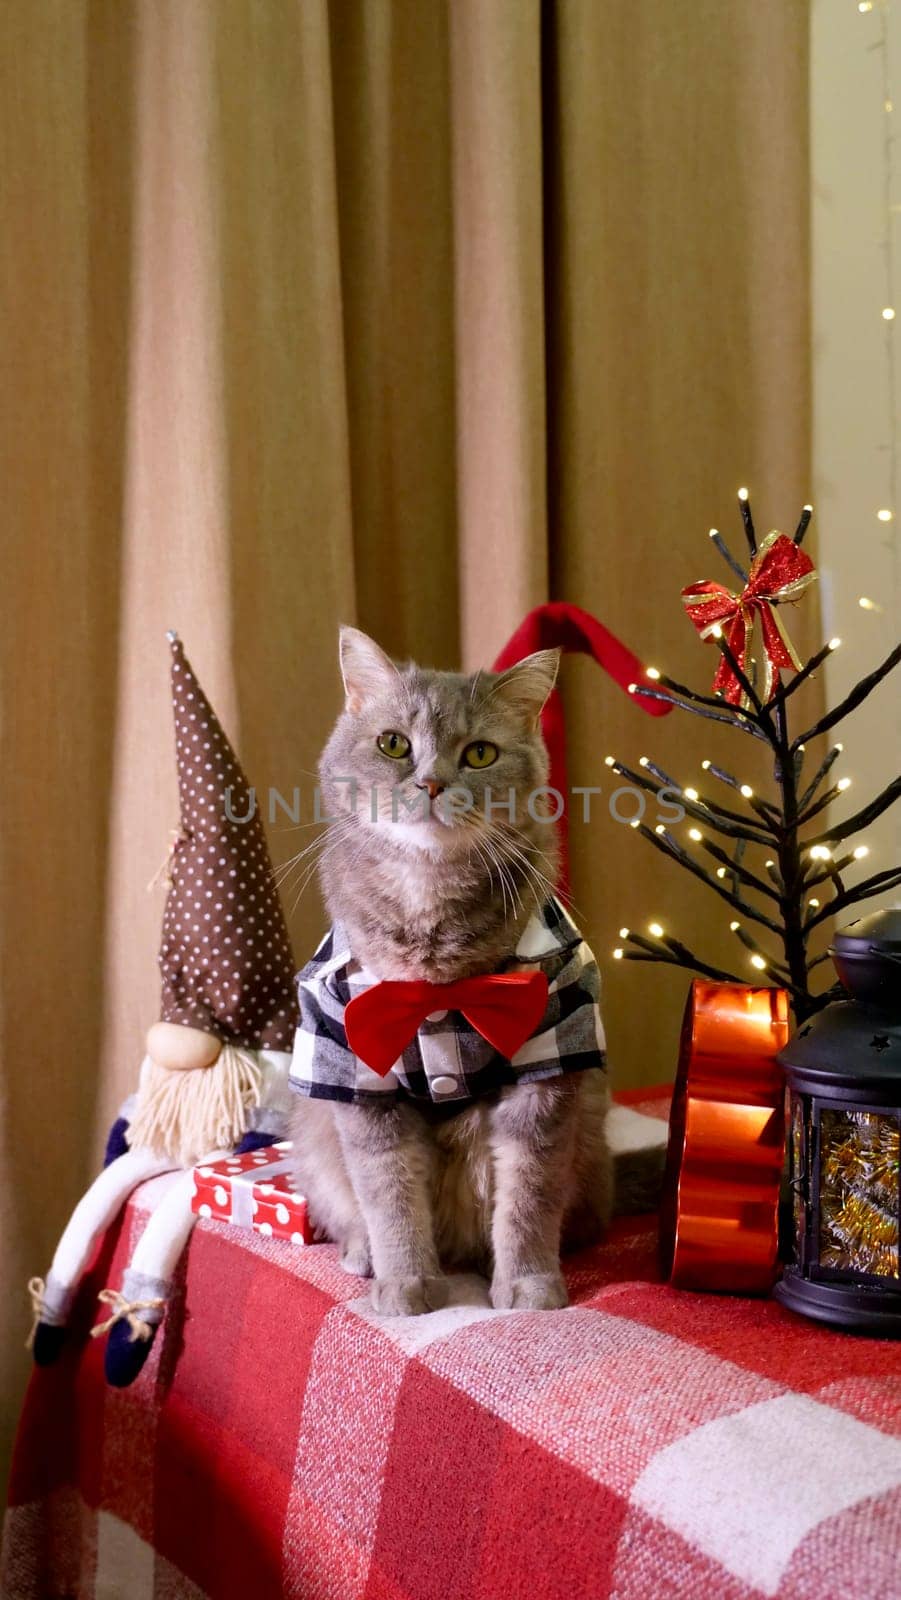 Scottish straight eared cat and red tie decorations on New Year's, celebrating Holiday Christmas. Pet sitting on the bed at home